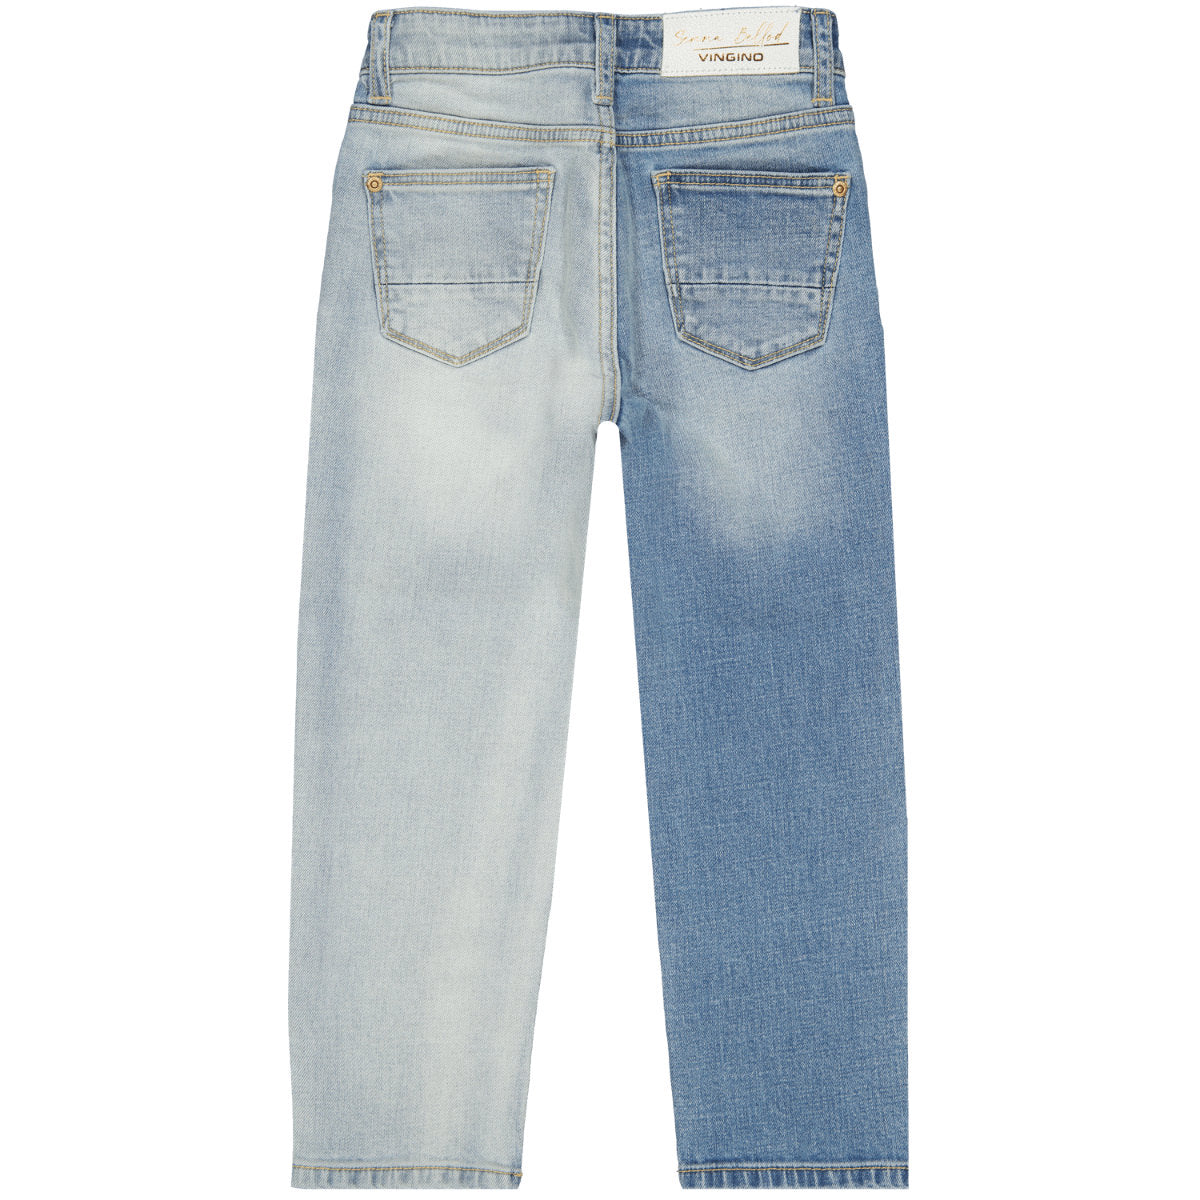 Vingino Jeans Candy Bleach